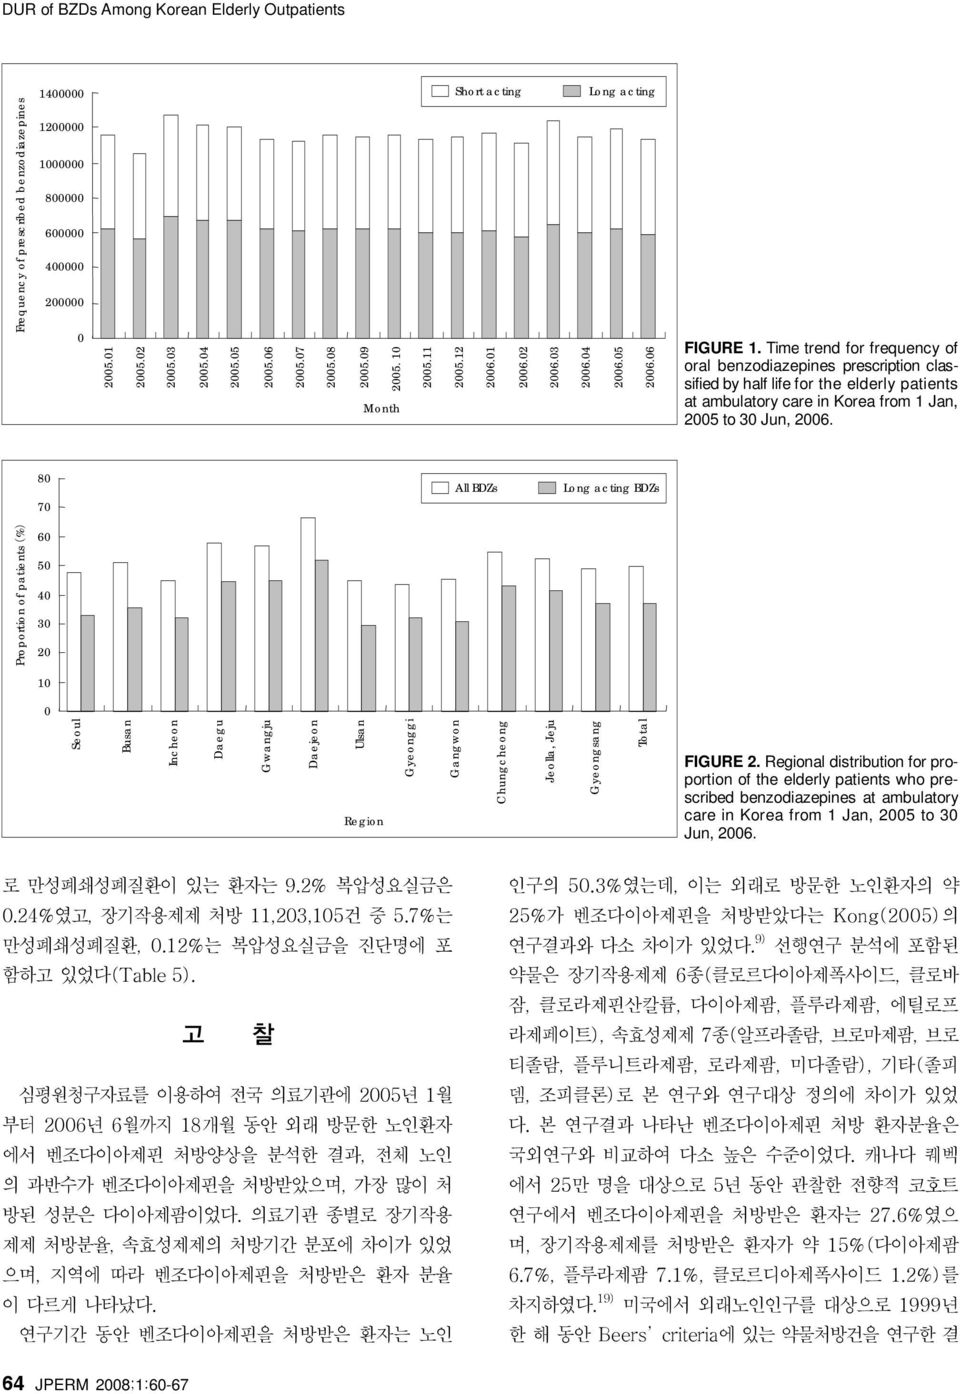 Time trend for frequency of oral benzodiazepines prescription classified by half life for the elderly patients at ambulatory care in Korea from 1 Jan, 2005 to 30 Jun, 2006.